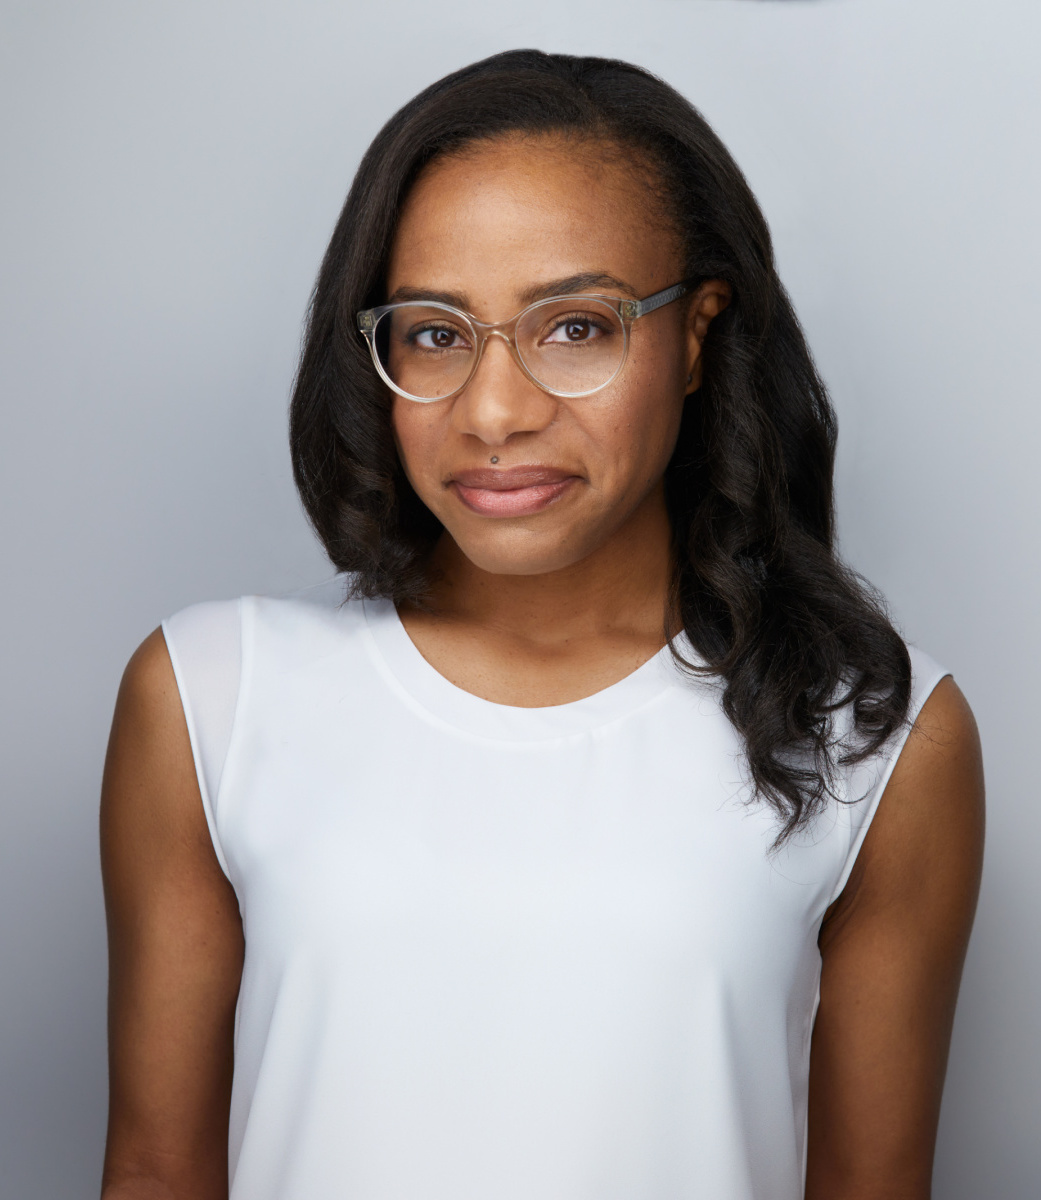 Portrait of Giselle Thompson - a Black-Caribbean woman with glasses and curled hair that falls just past her shoulders